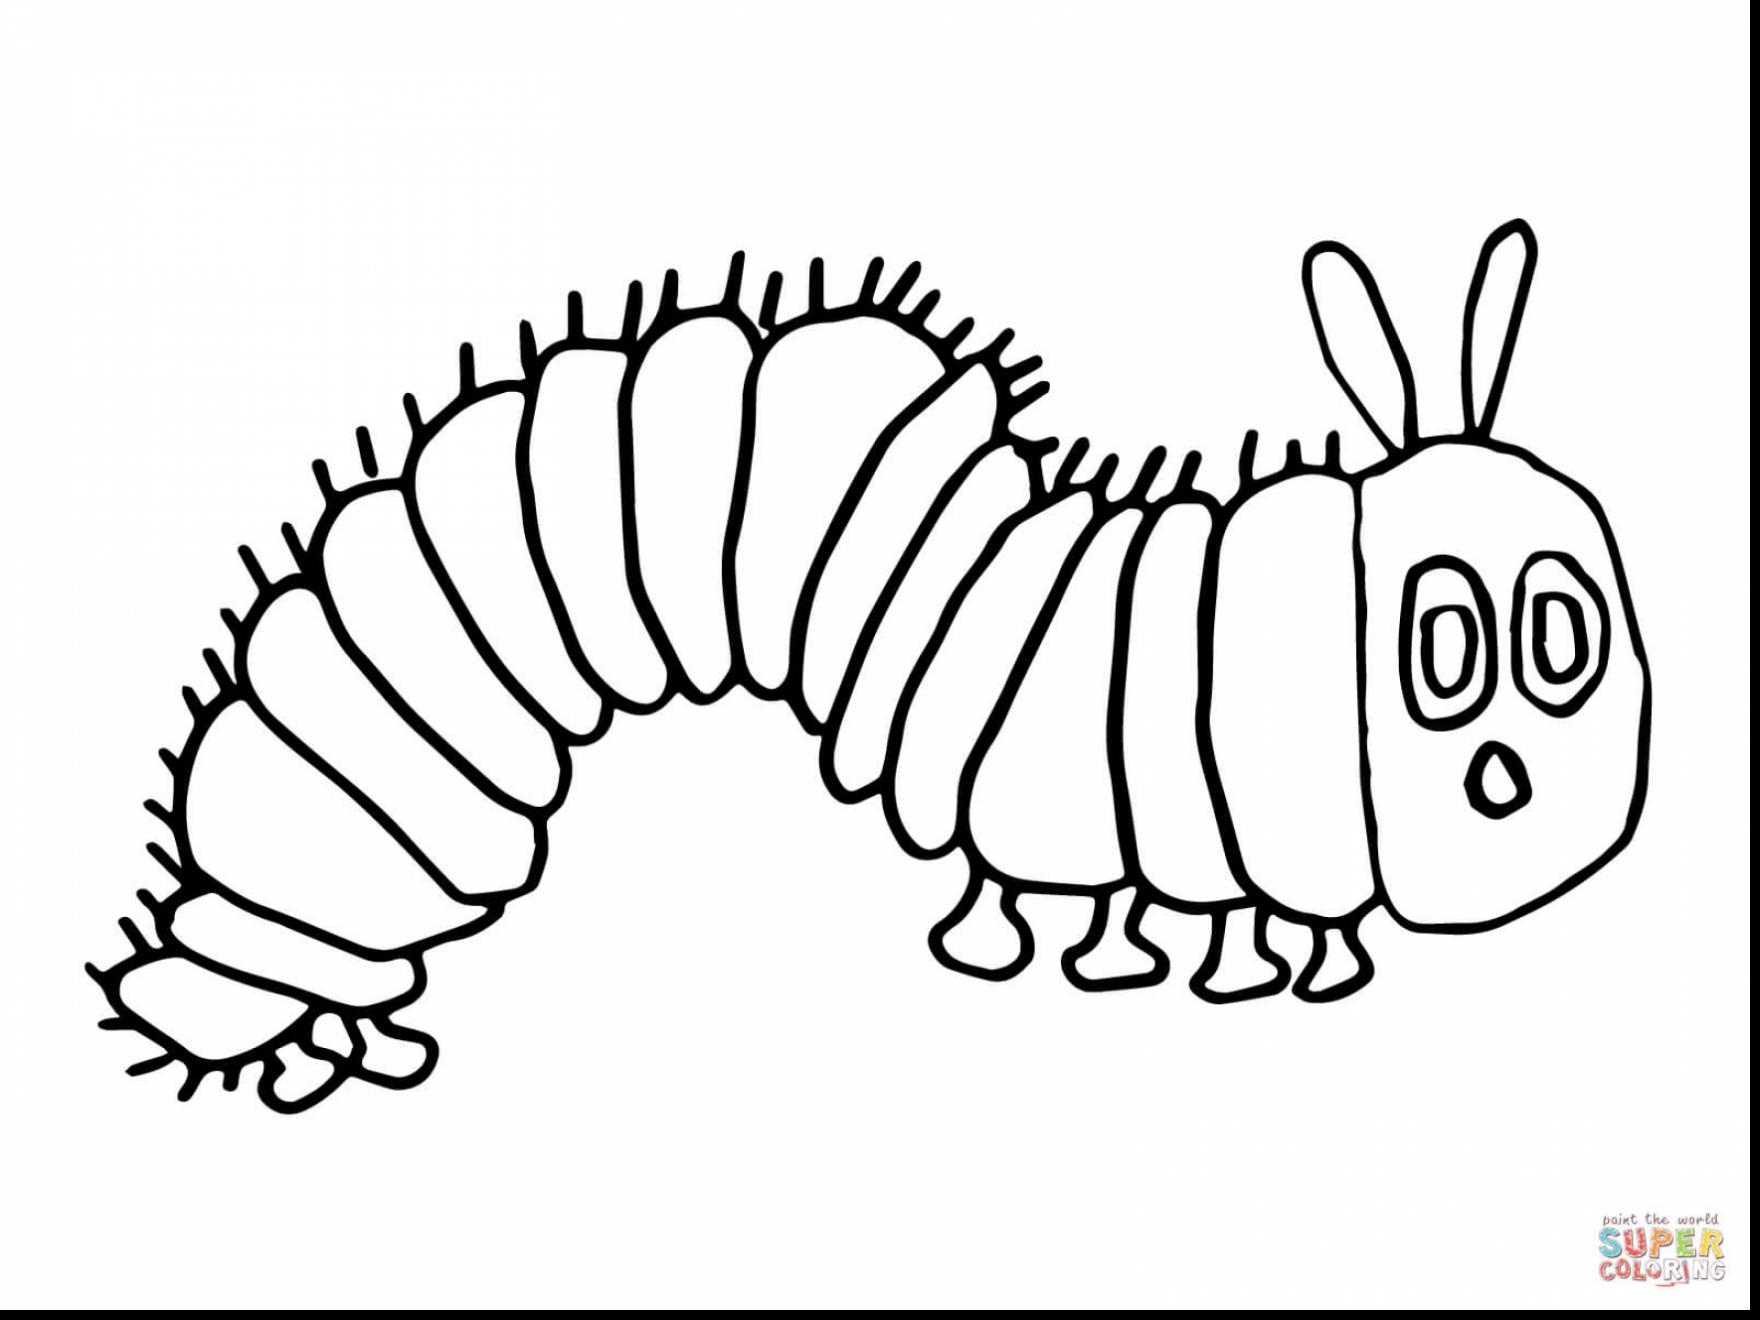 Hungry drawing at getdrawings. Caterpillar clipart sketch